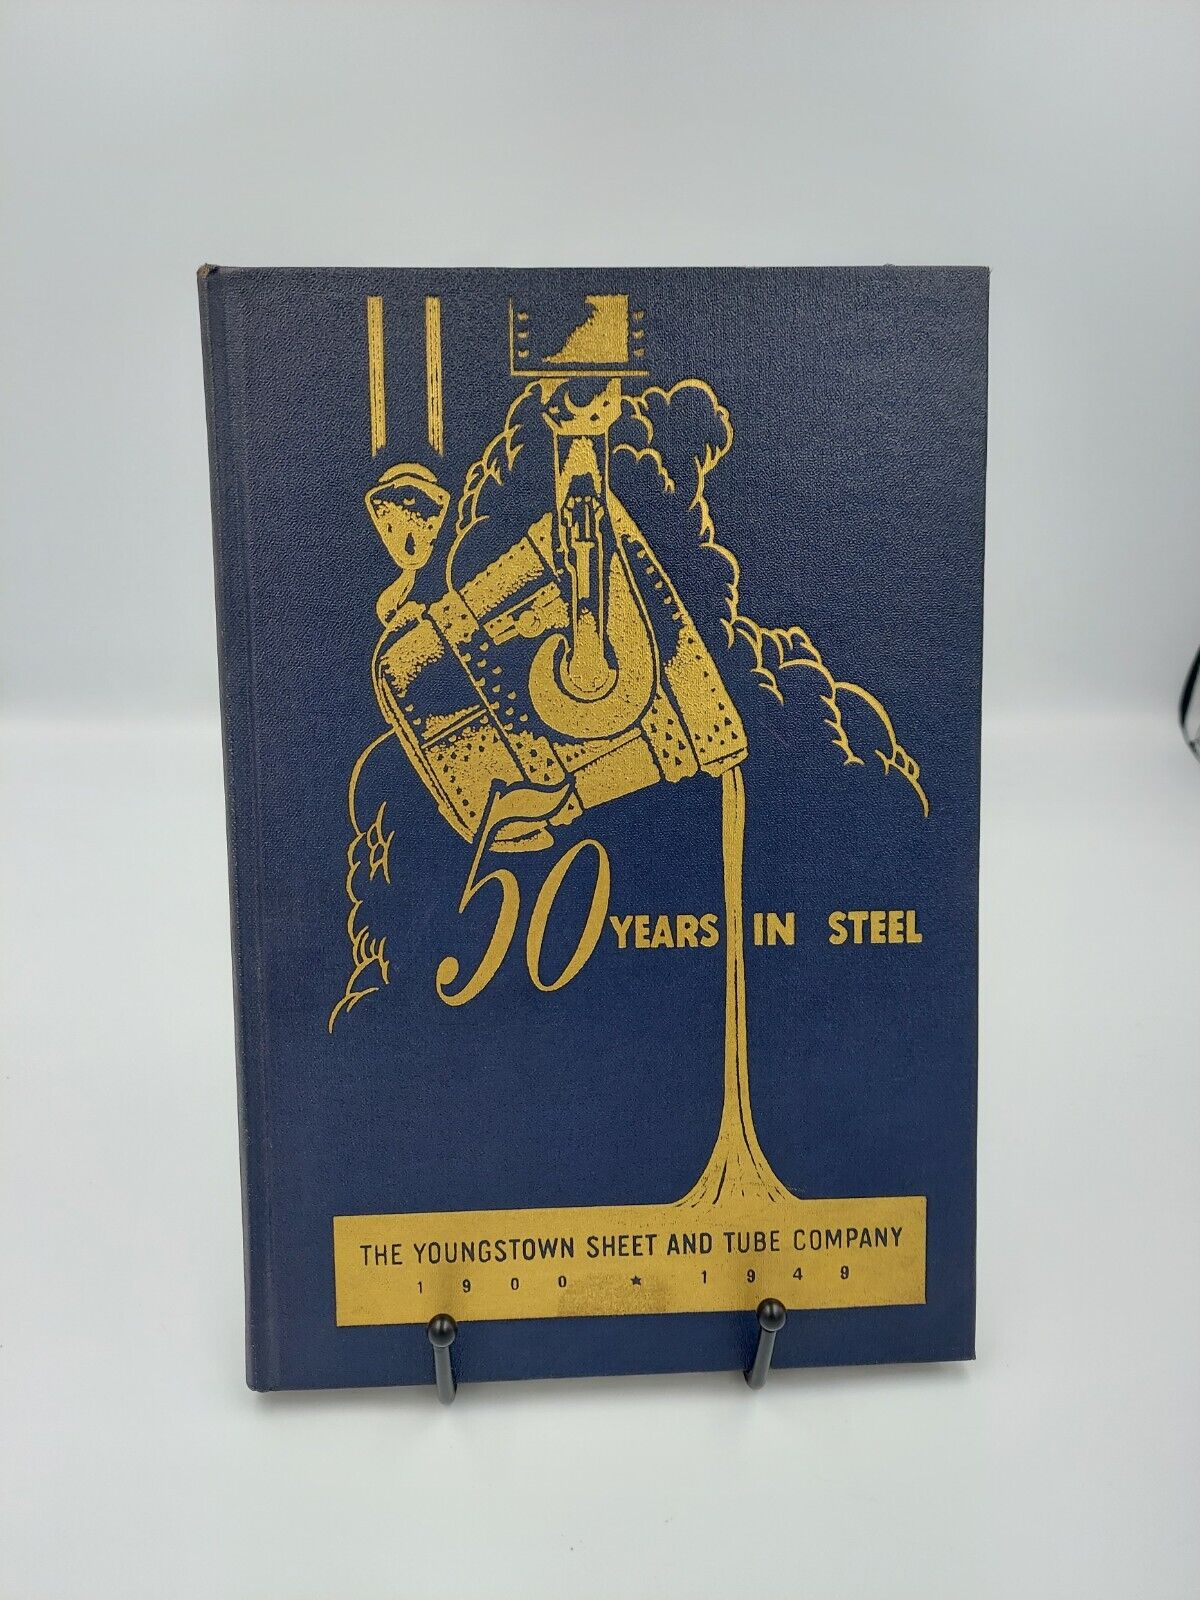 VINTAGE Youngstown Sheet & Tube Co. 1900-1949 50 YEARS IN STEEL BOOK